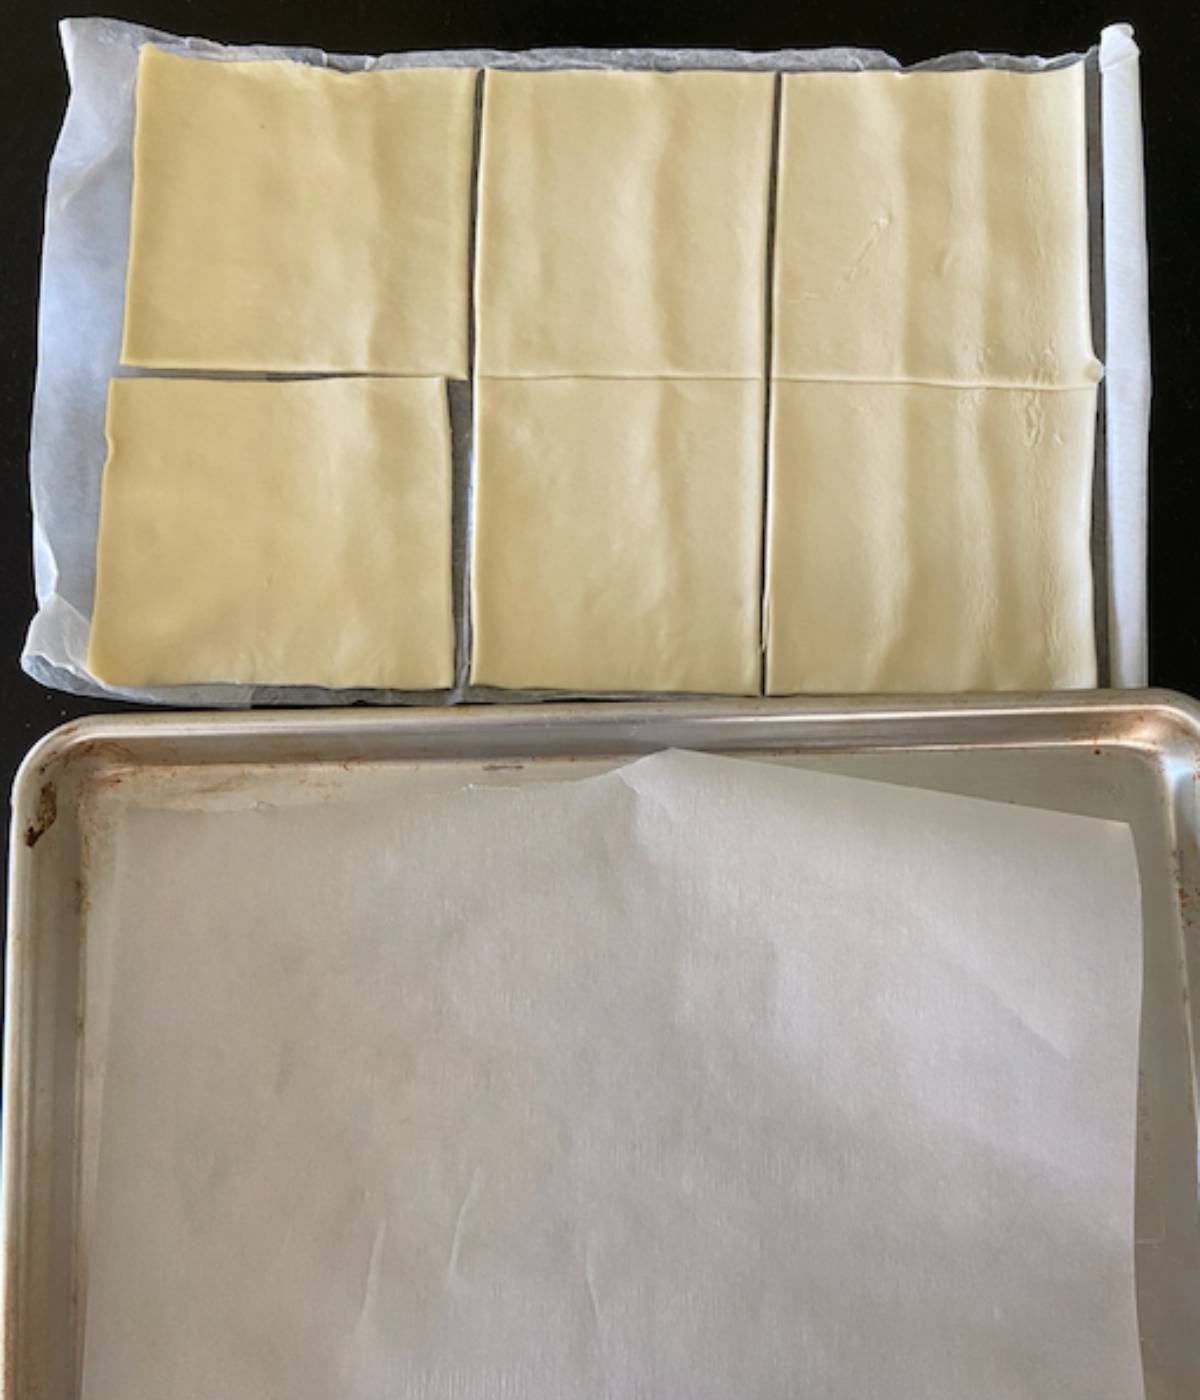 Puff pastry cut into 6 equal squares and cookie sheet covered with parchment paper.